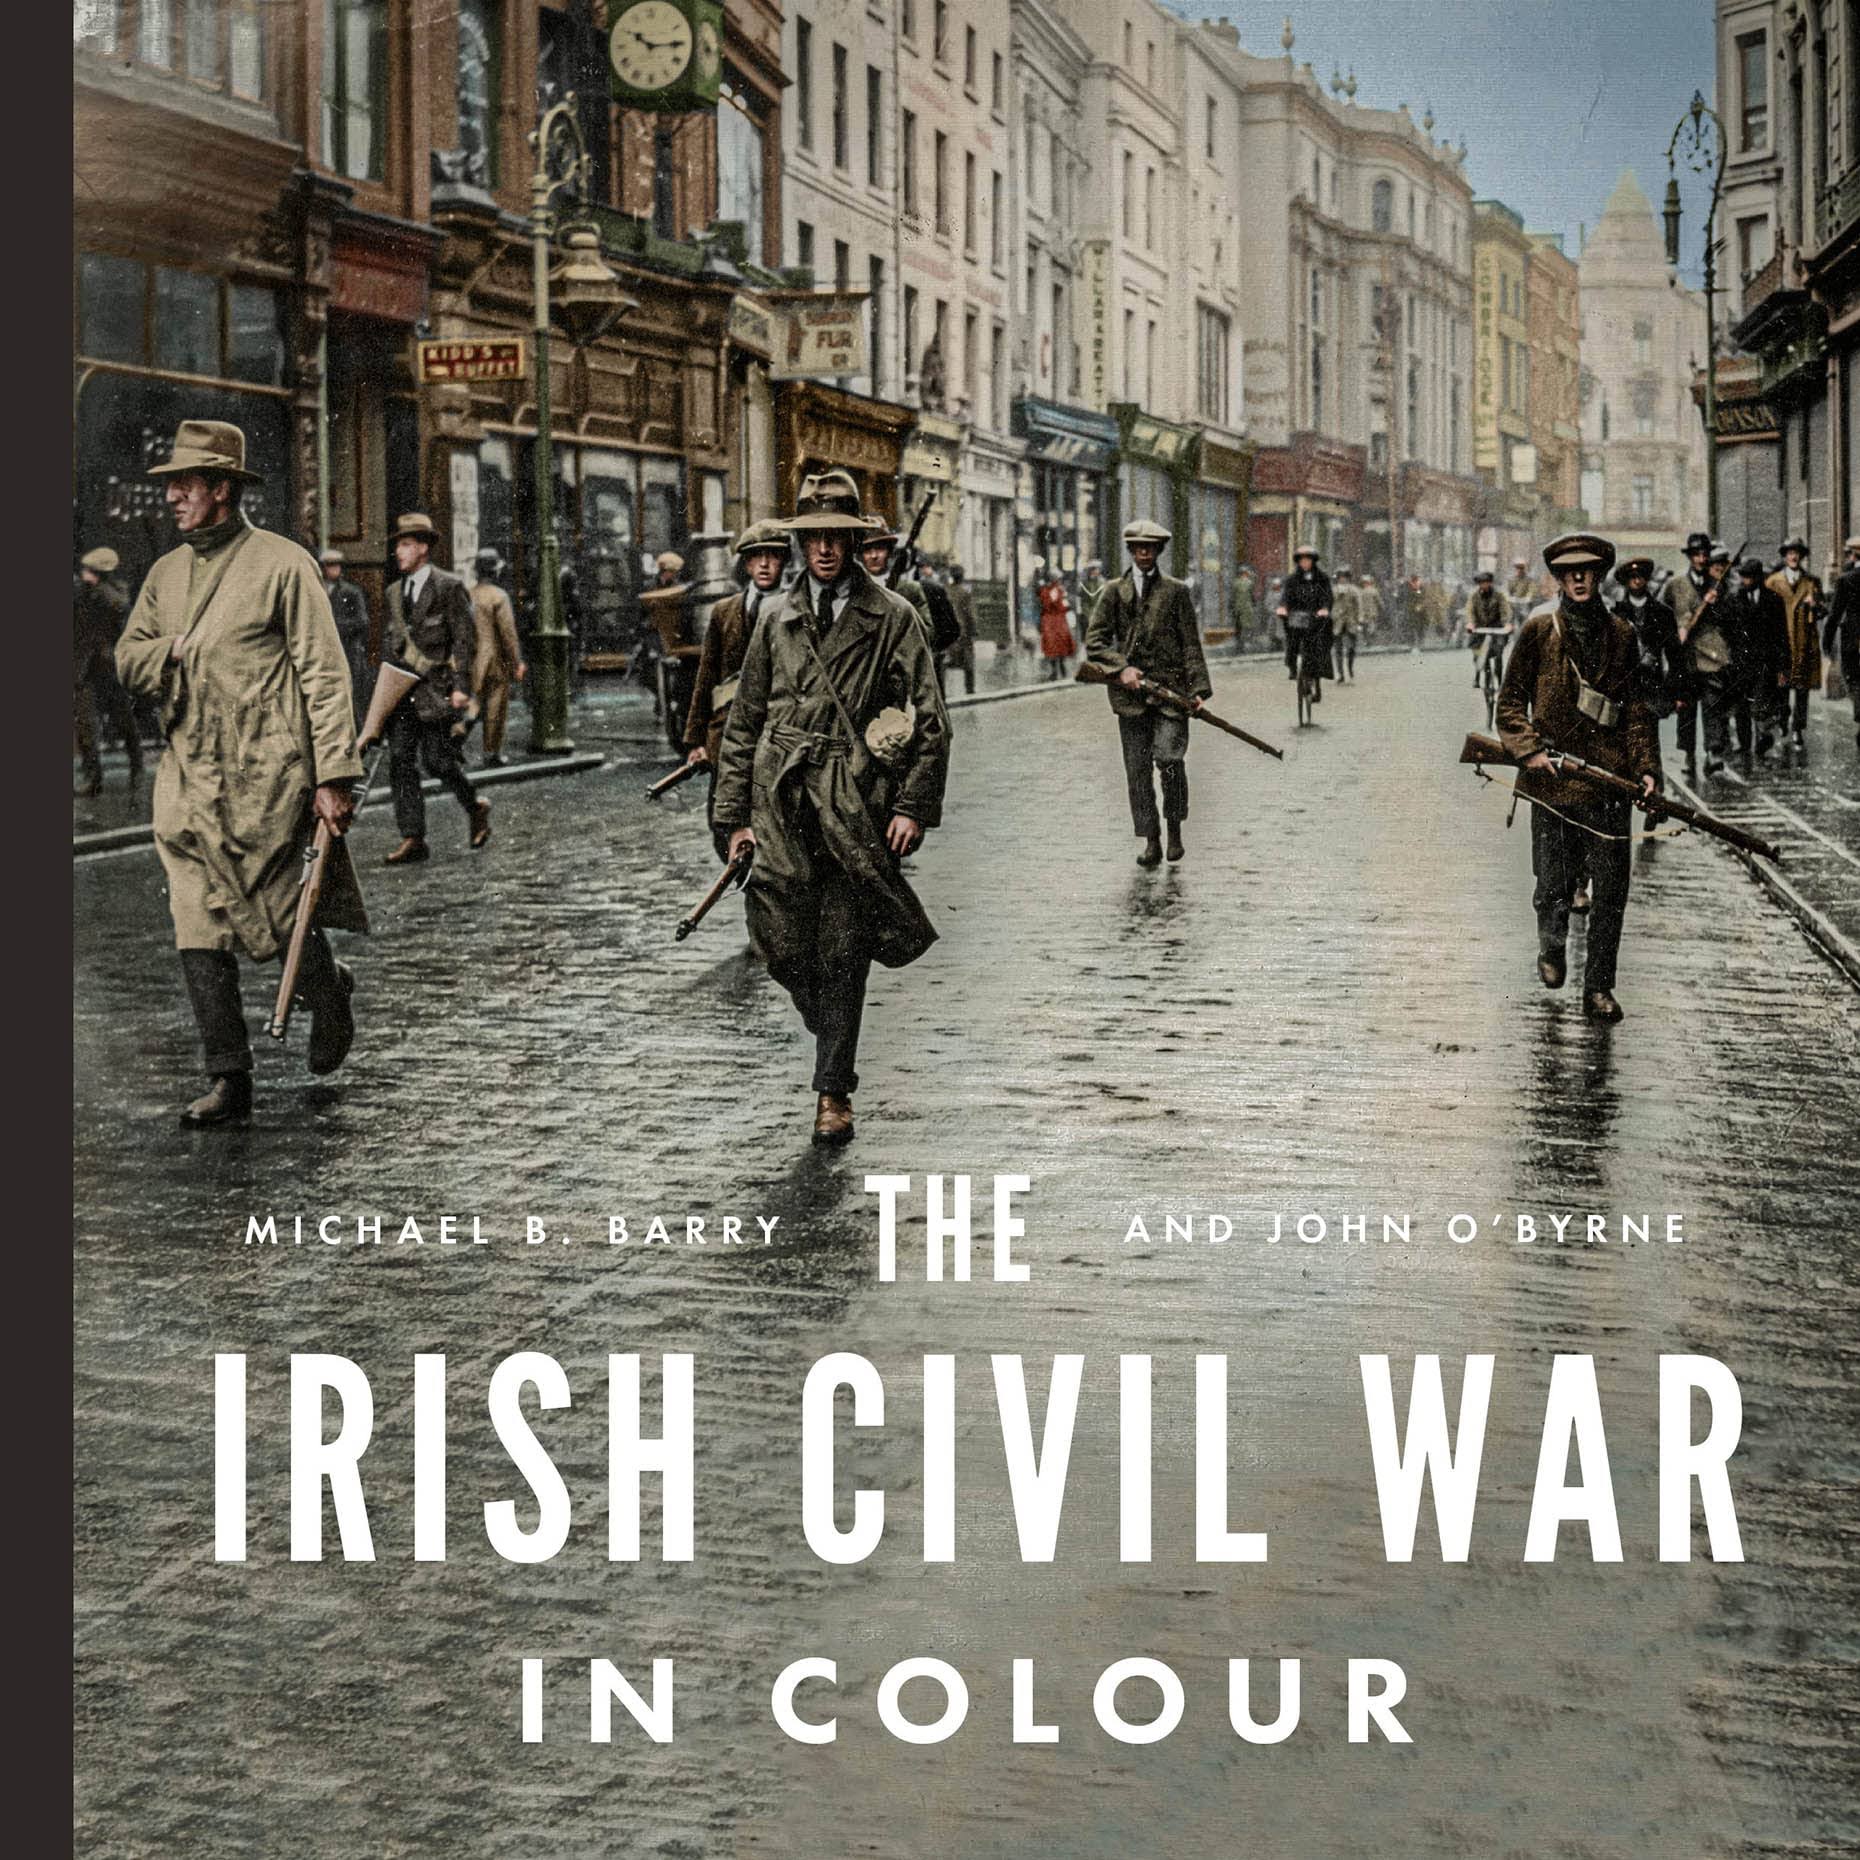 The Irish Civil War in Colour by Michael B. Barry